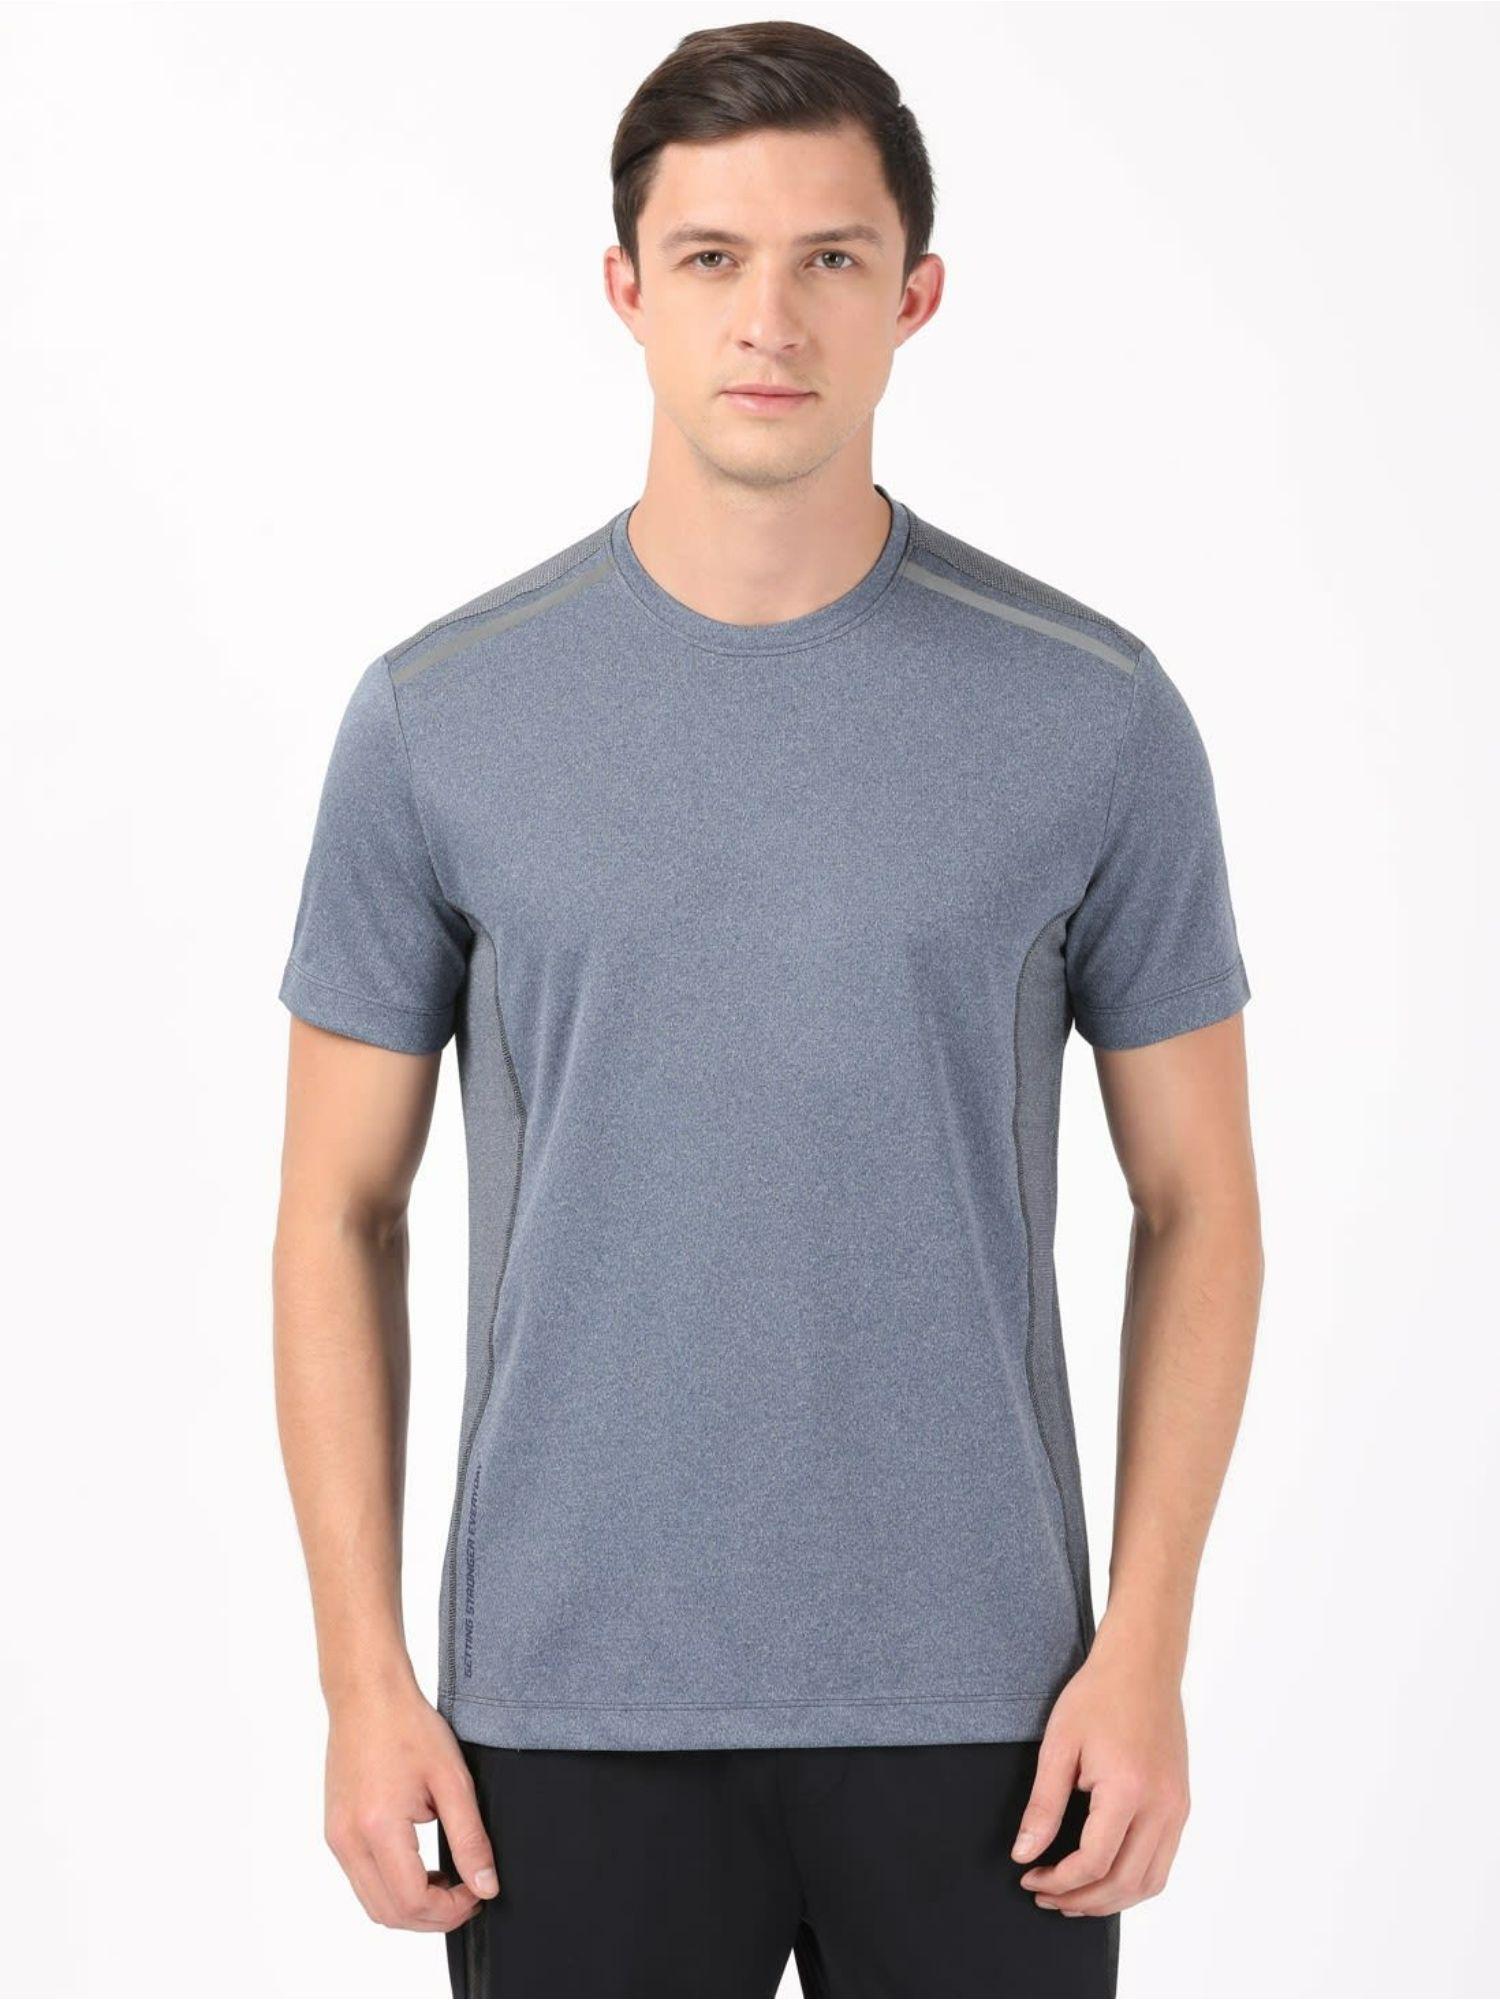 mv35 round neck microfiber t-shirt with breathable mesh & stay fresh treatment navy